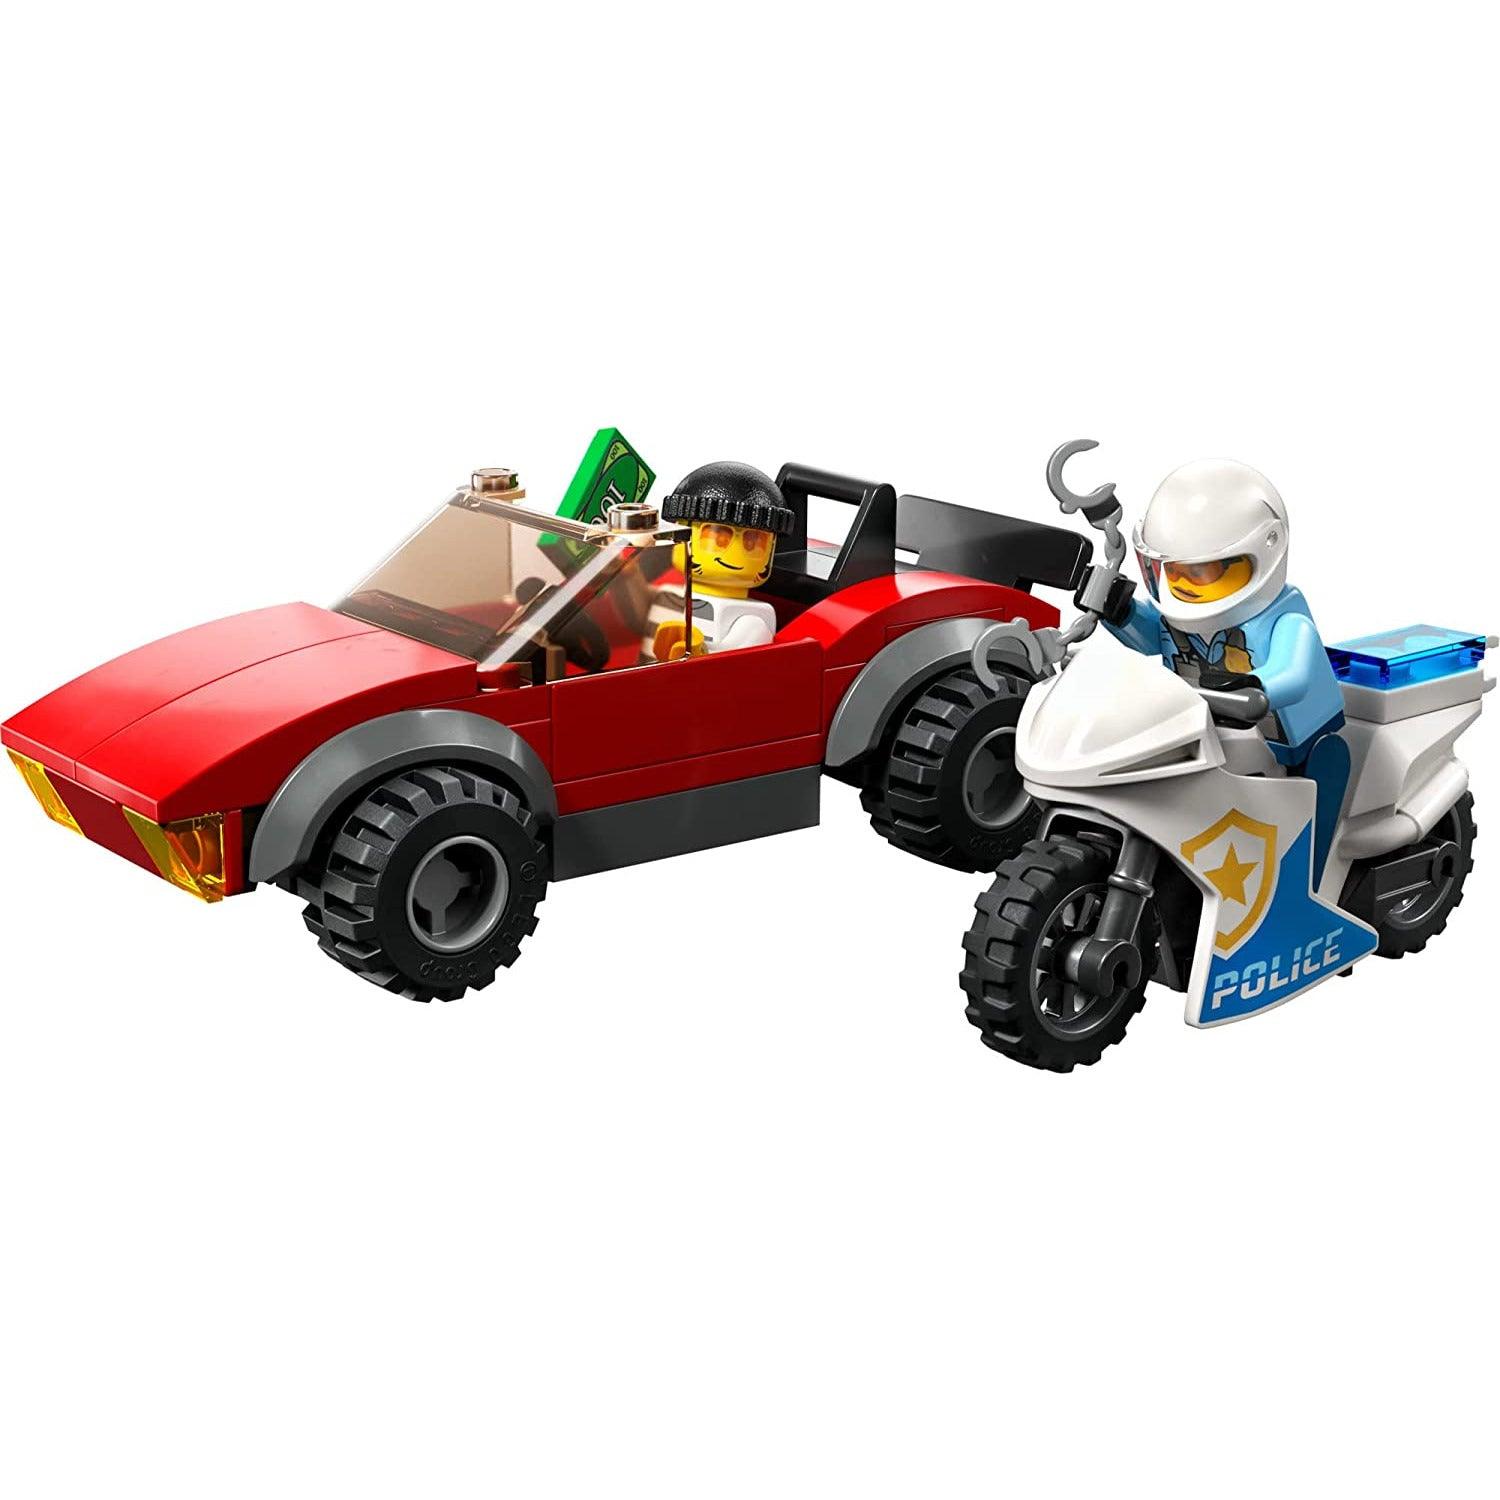 LEGO City 60392 Police Bike Car Chase, Toy with Racing Vehicle & Motorbike Toys (59 Pieces) - BumbleToys - 4+ Years, 5-7 Years, 6+ Years, Boys, Cars, City, Clearance, EXO, LEGO, Pre-Order